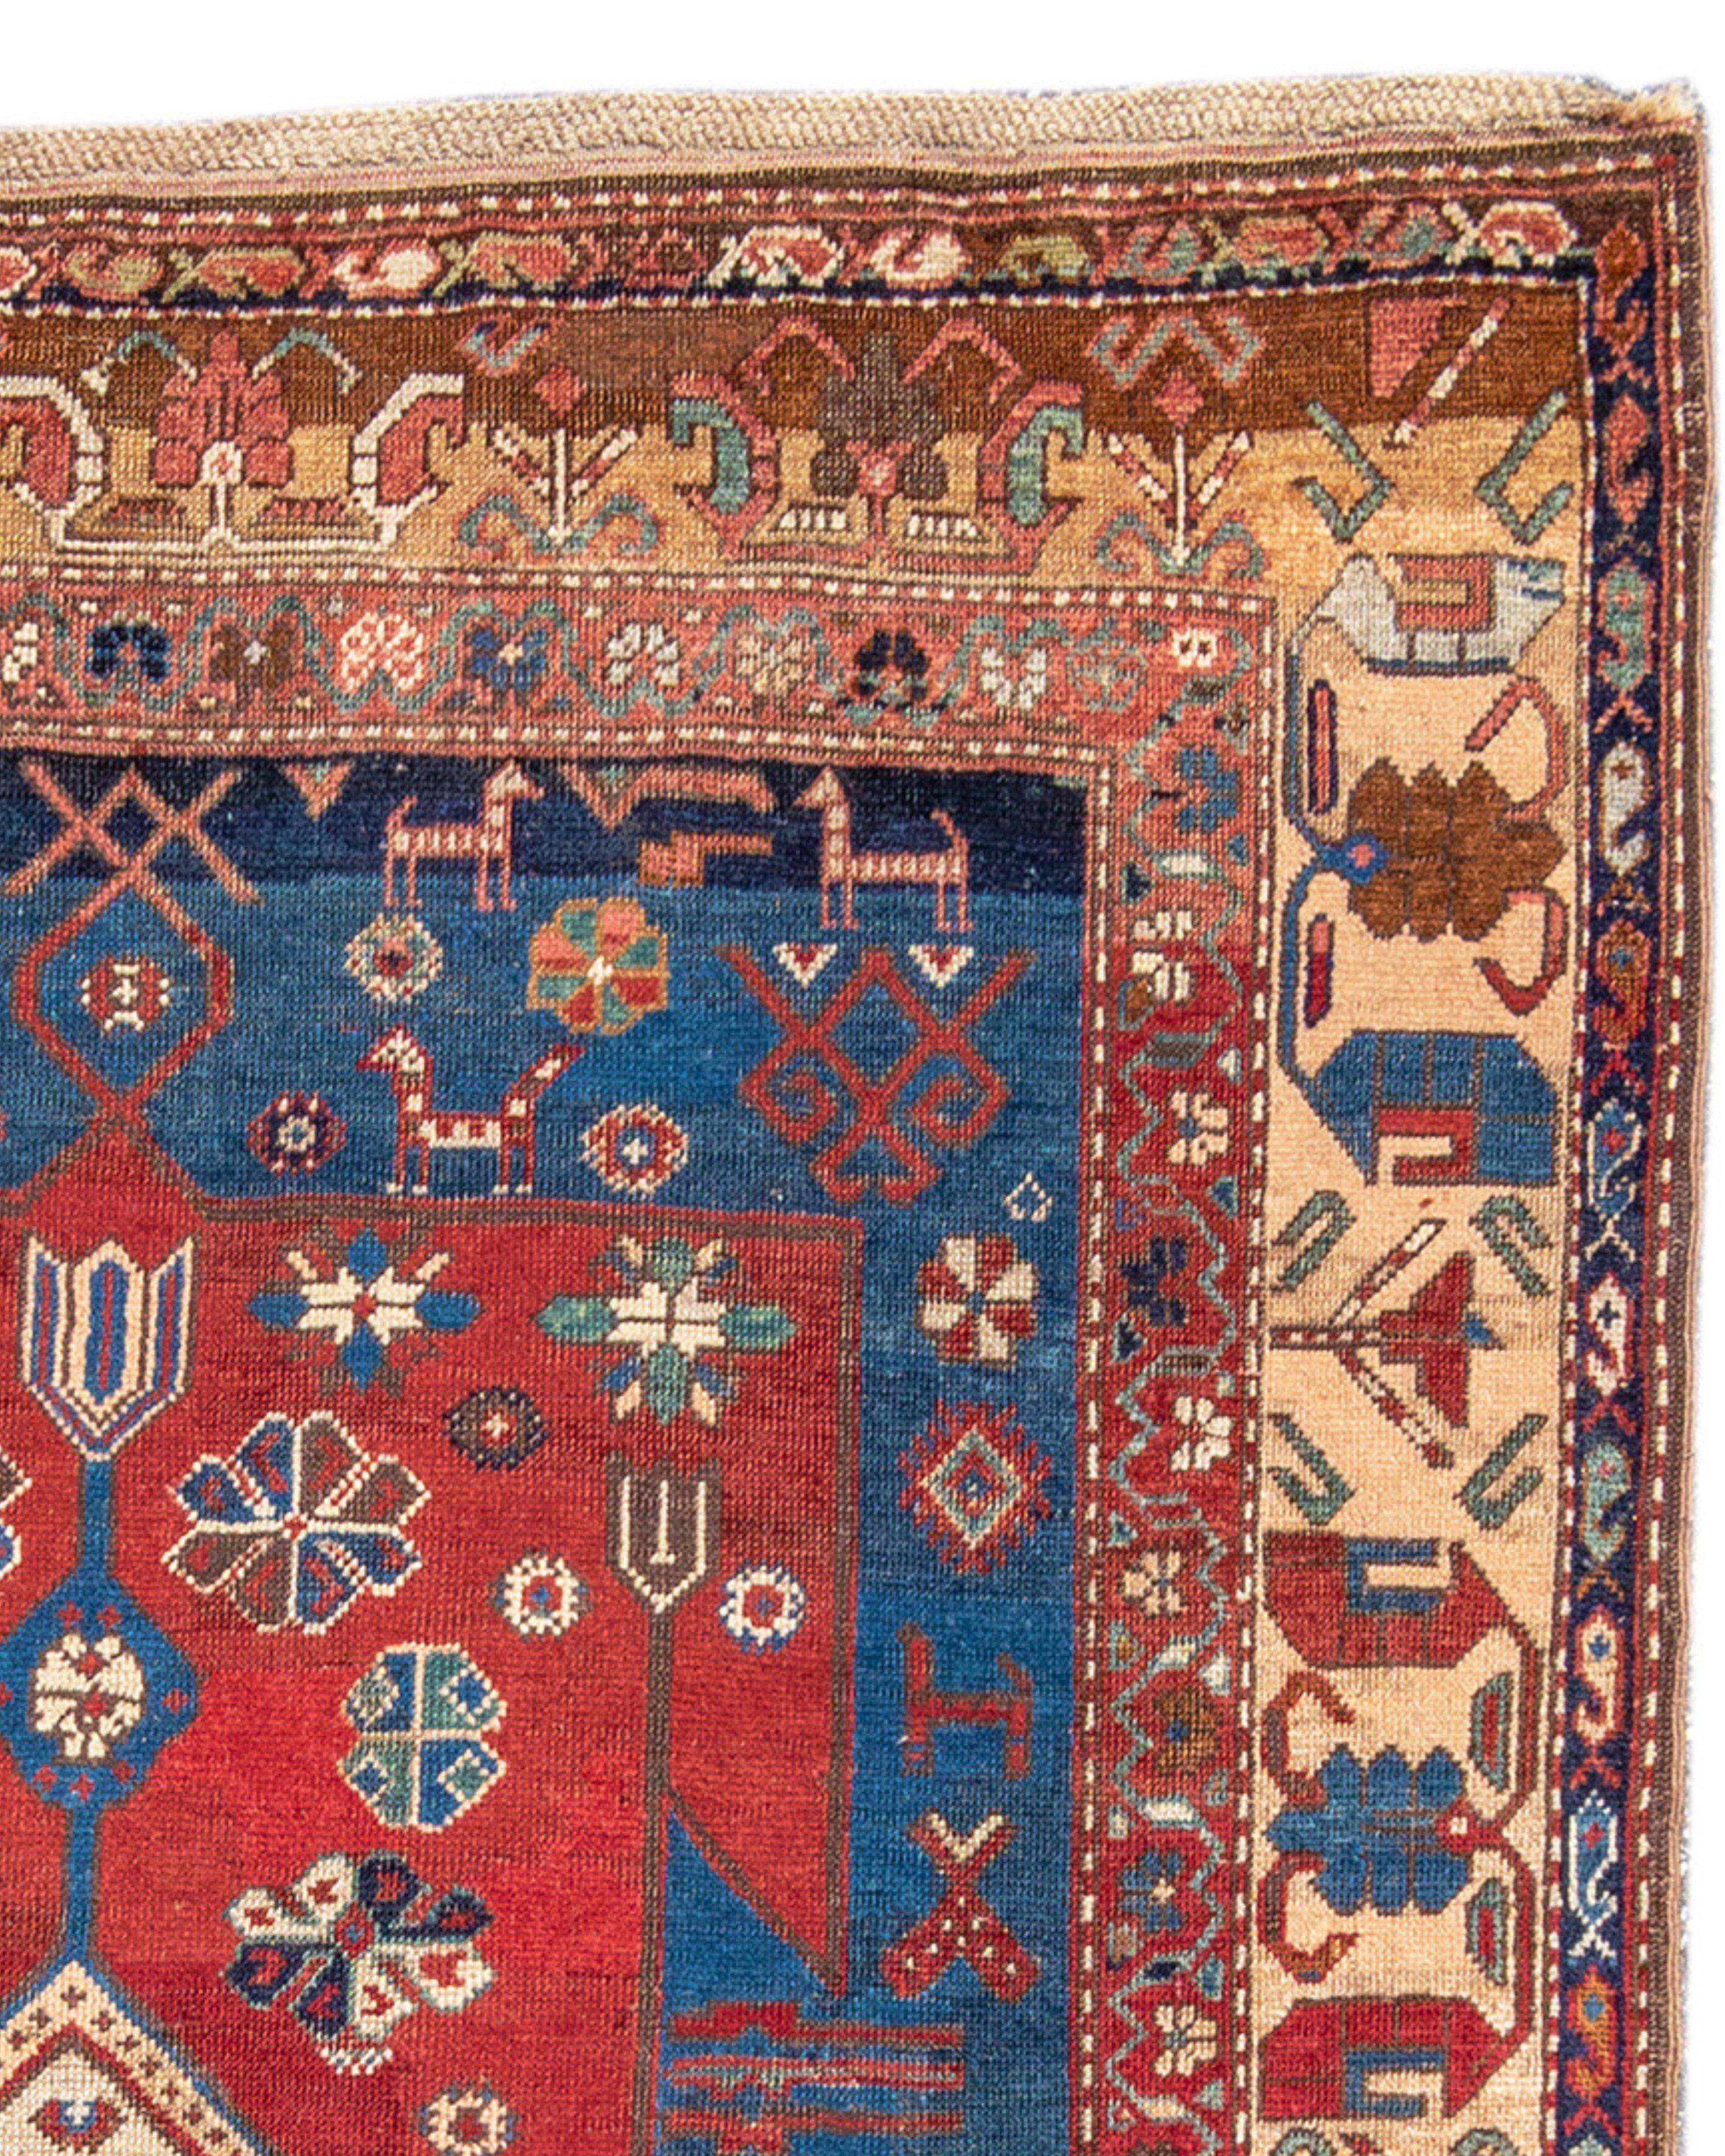 Antique Karabagh Rug, Late 19th Century

Additional Information:
Dimensions: 4'11